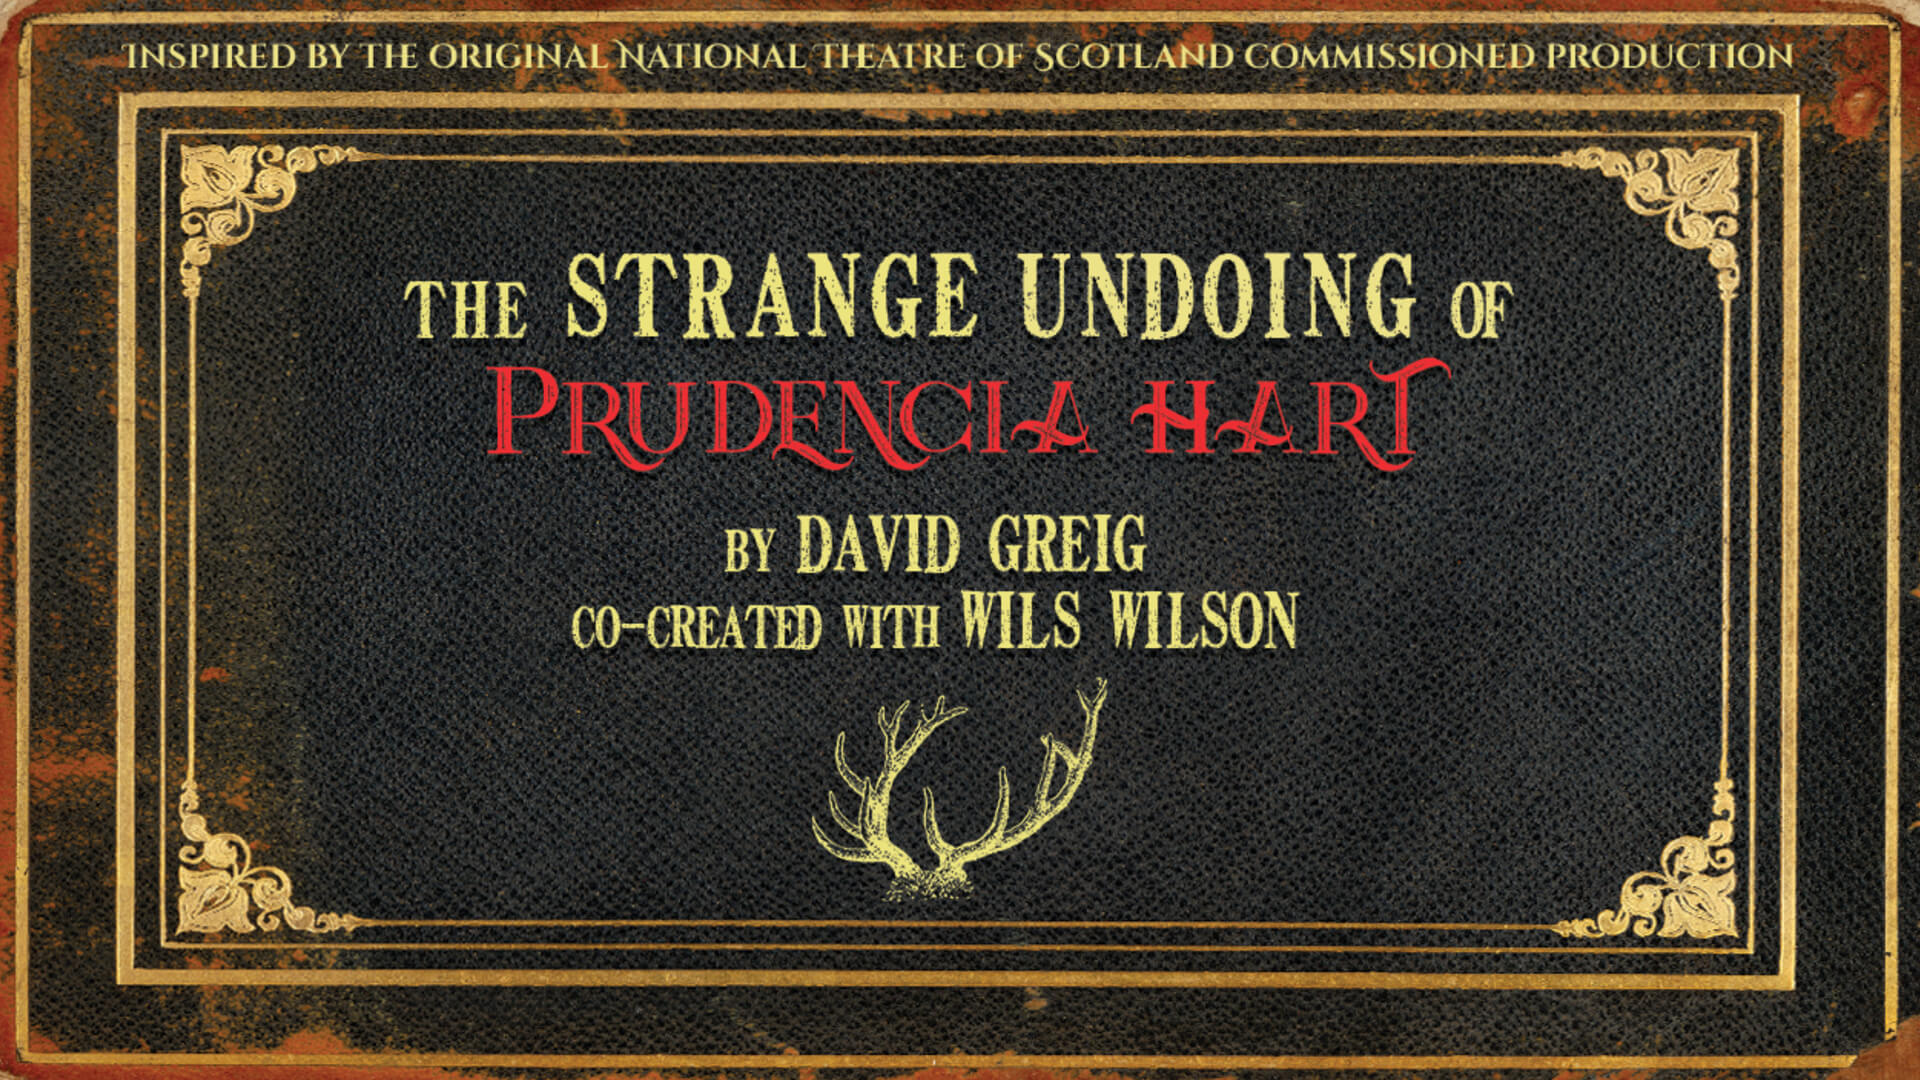 Experience the immersive story of Prudencia Hart